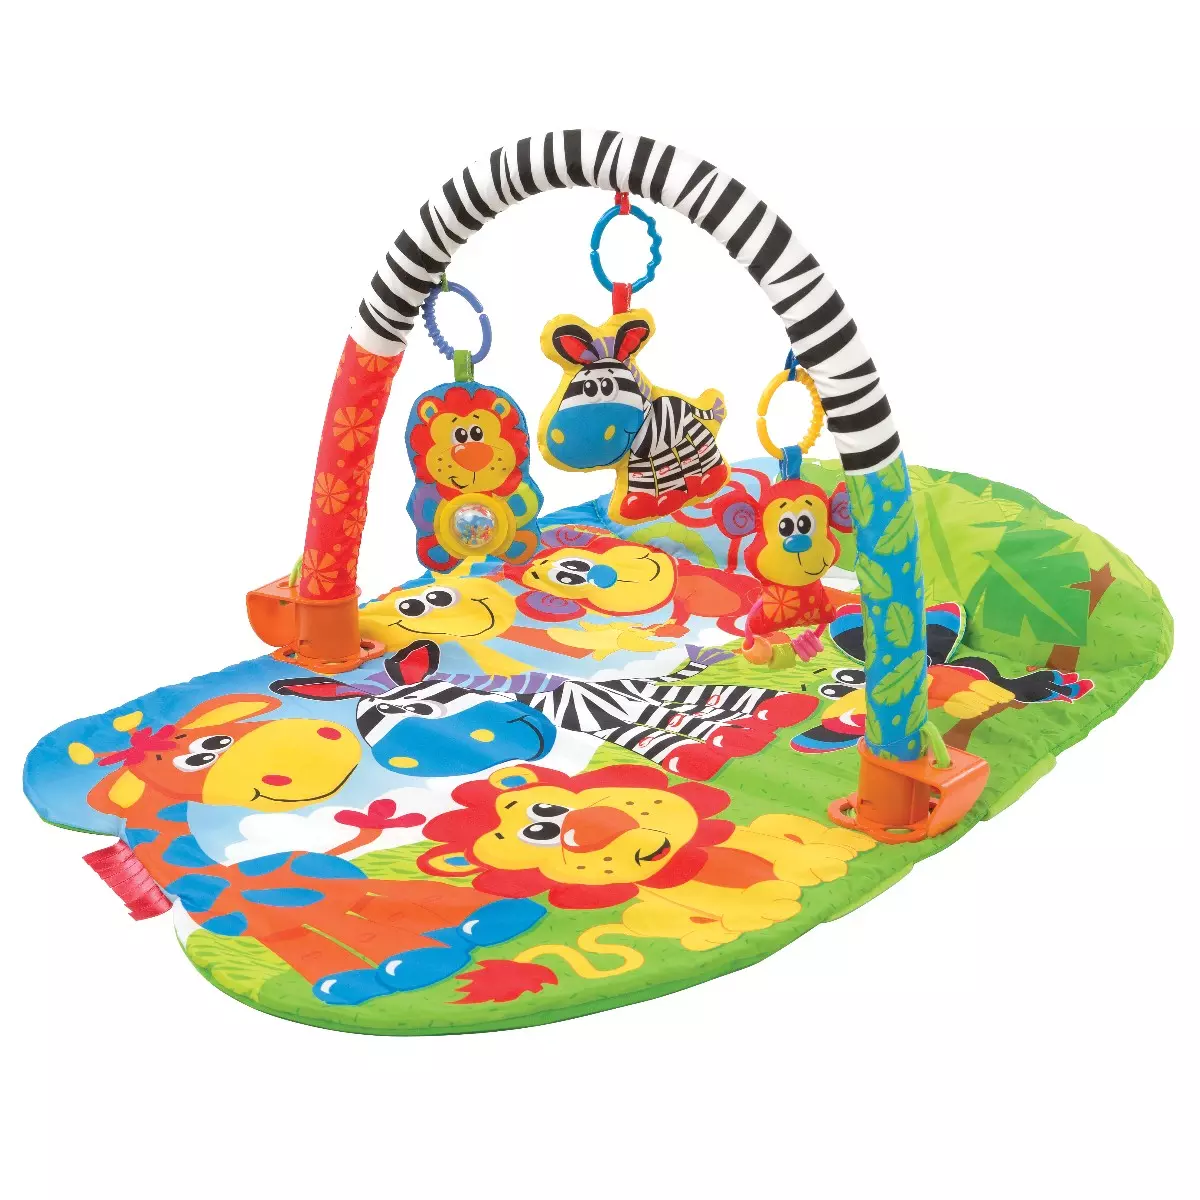 Playgro -In-Activity Gym 10181594